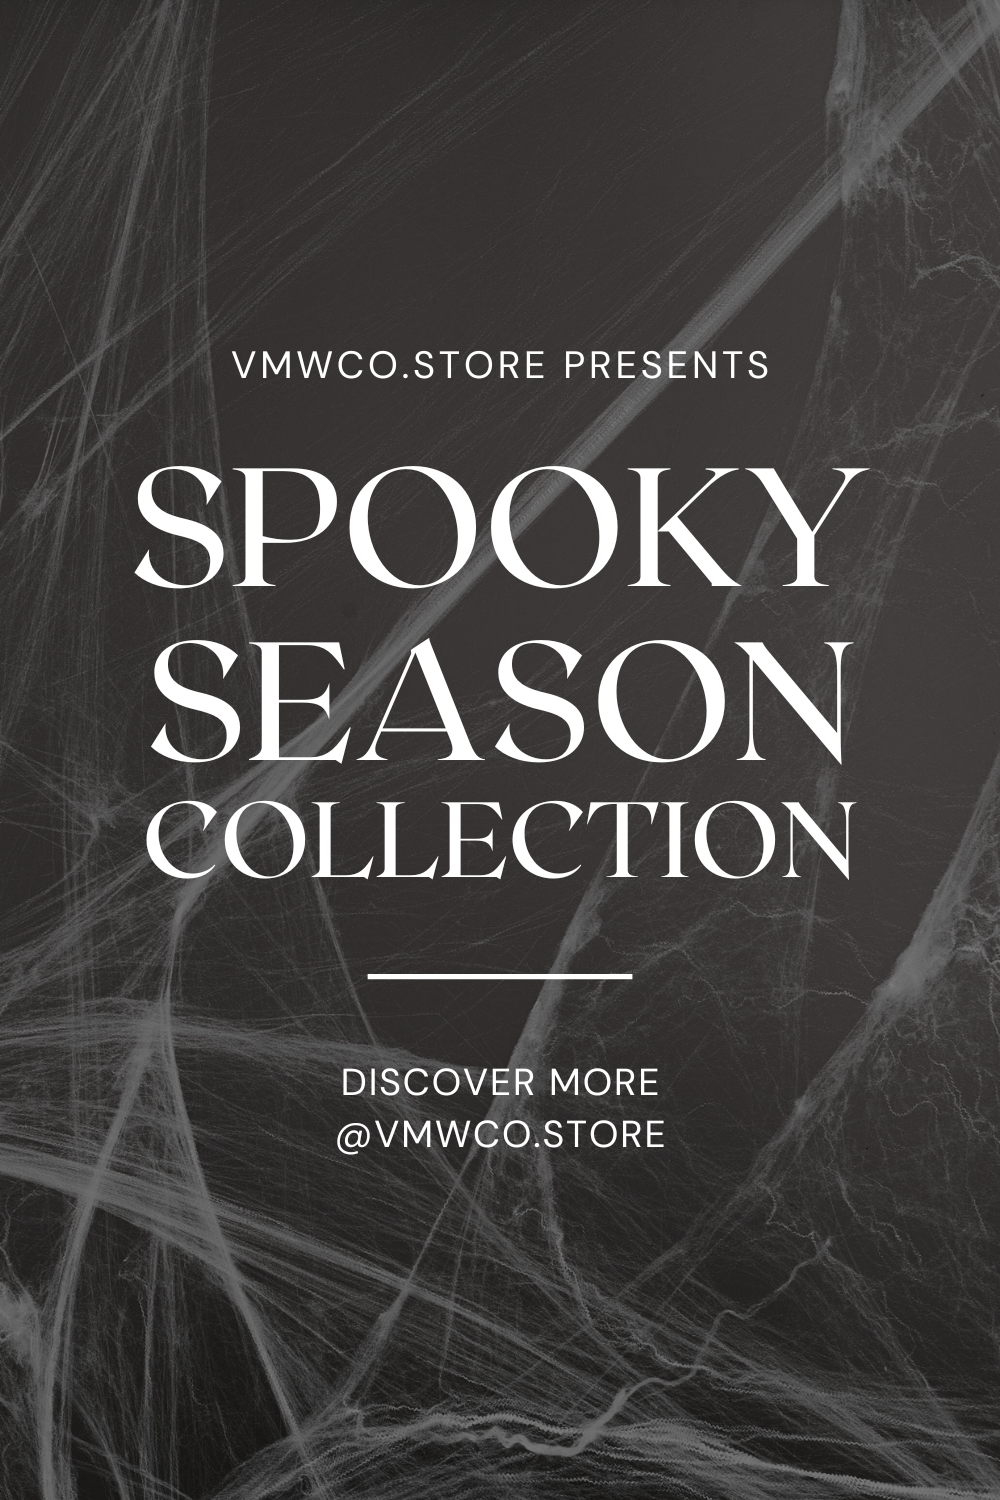 spooky season collection, Eco-Friendly Halloween: Scarily Stylish and Spookily Sustainable with vmwco.store